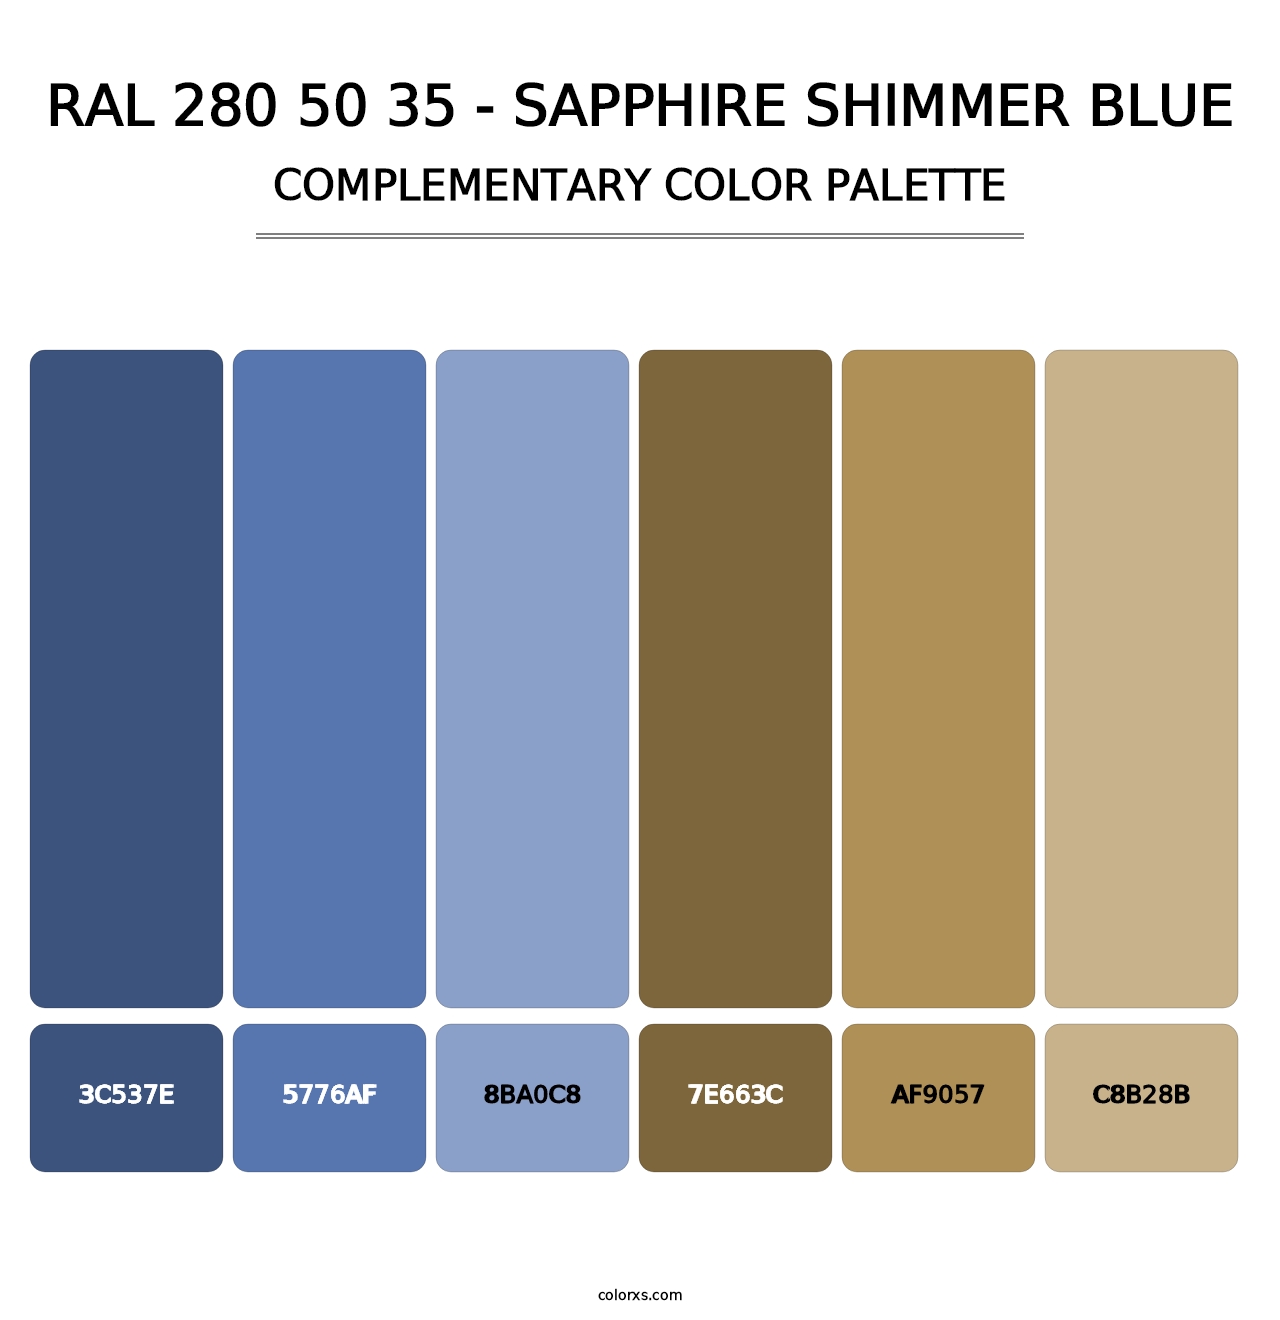 RAL 280 50 35 - Sapphire Shimmer Blue - Complementary Color Palette